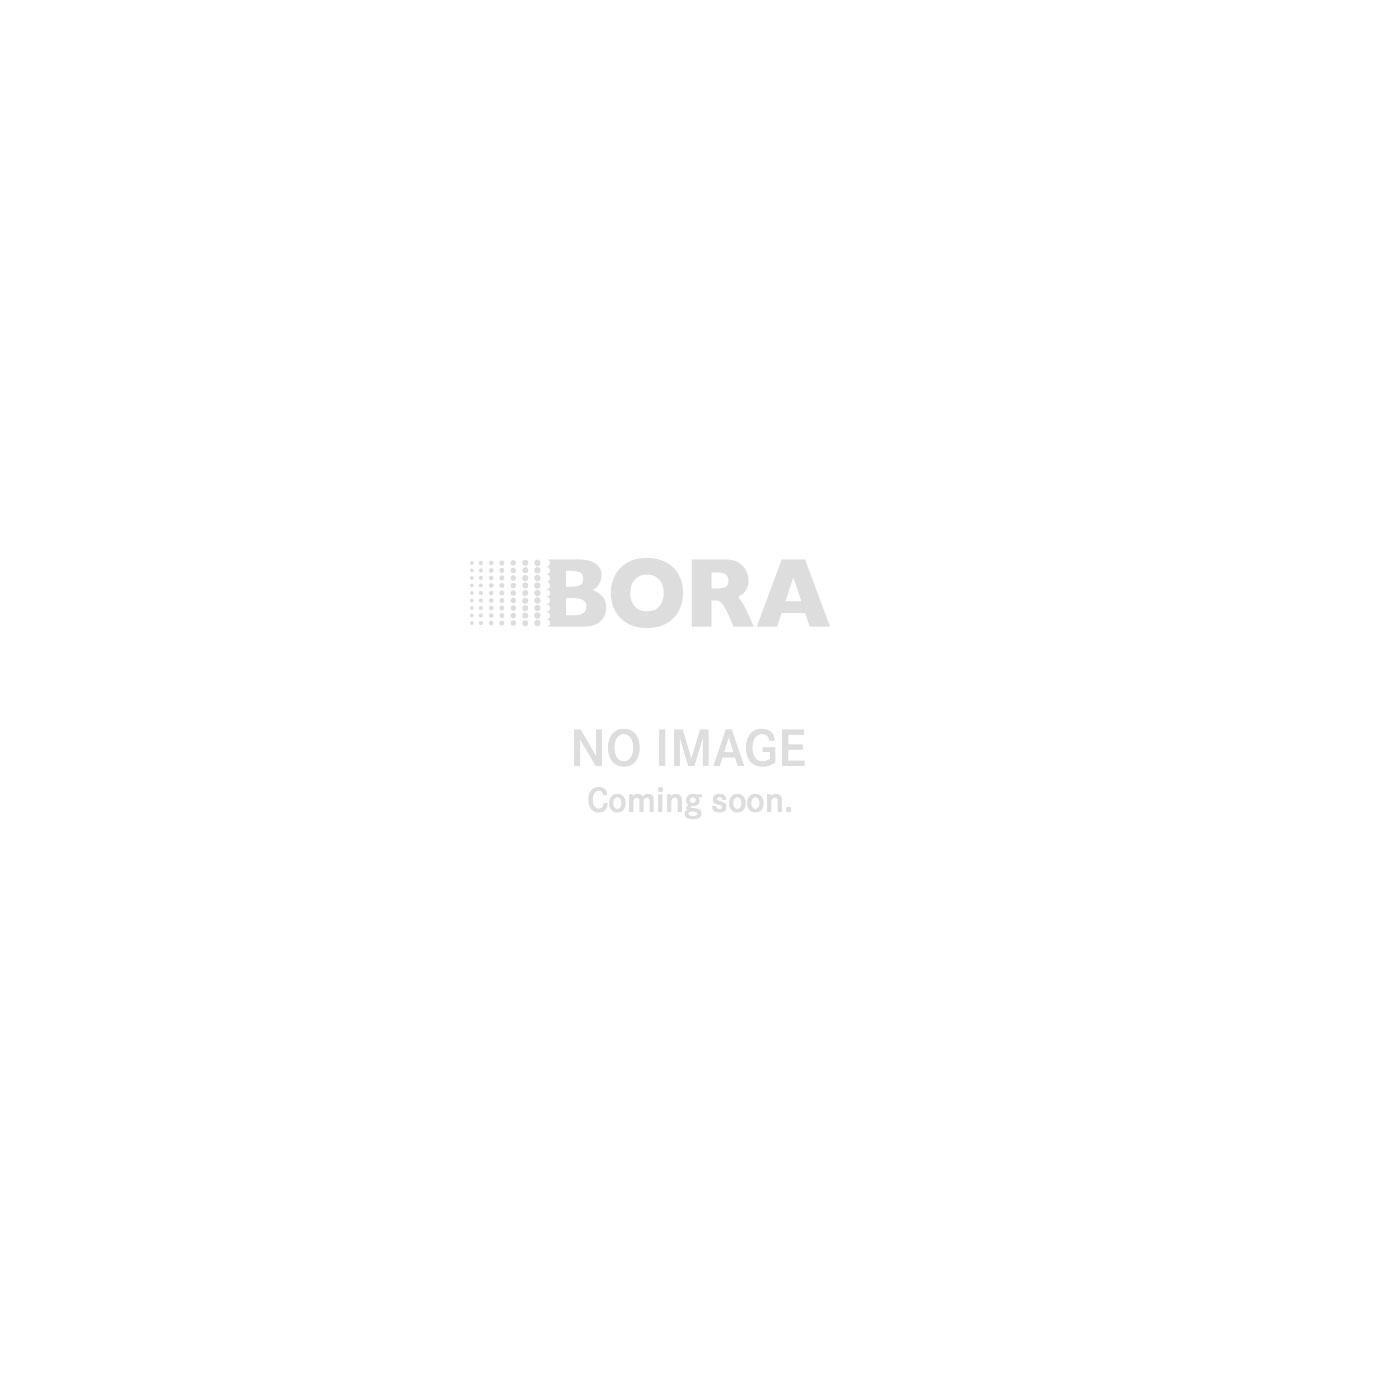 On a winning streak with the BORA X Pure: Innovative product wins the Red Dot Award 